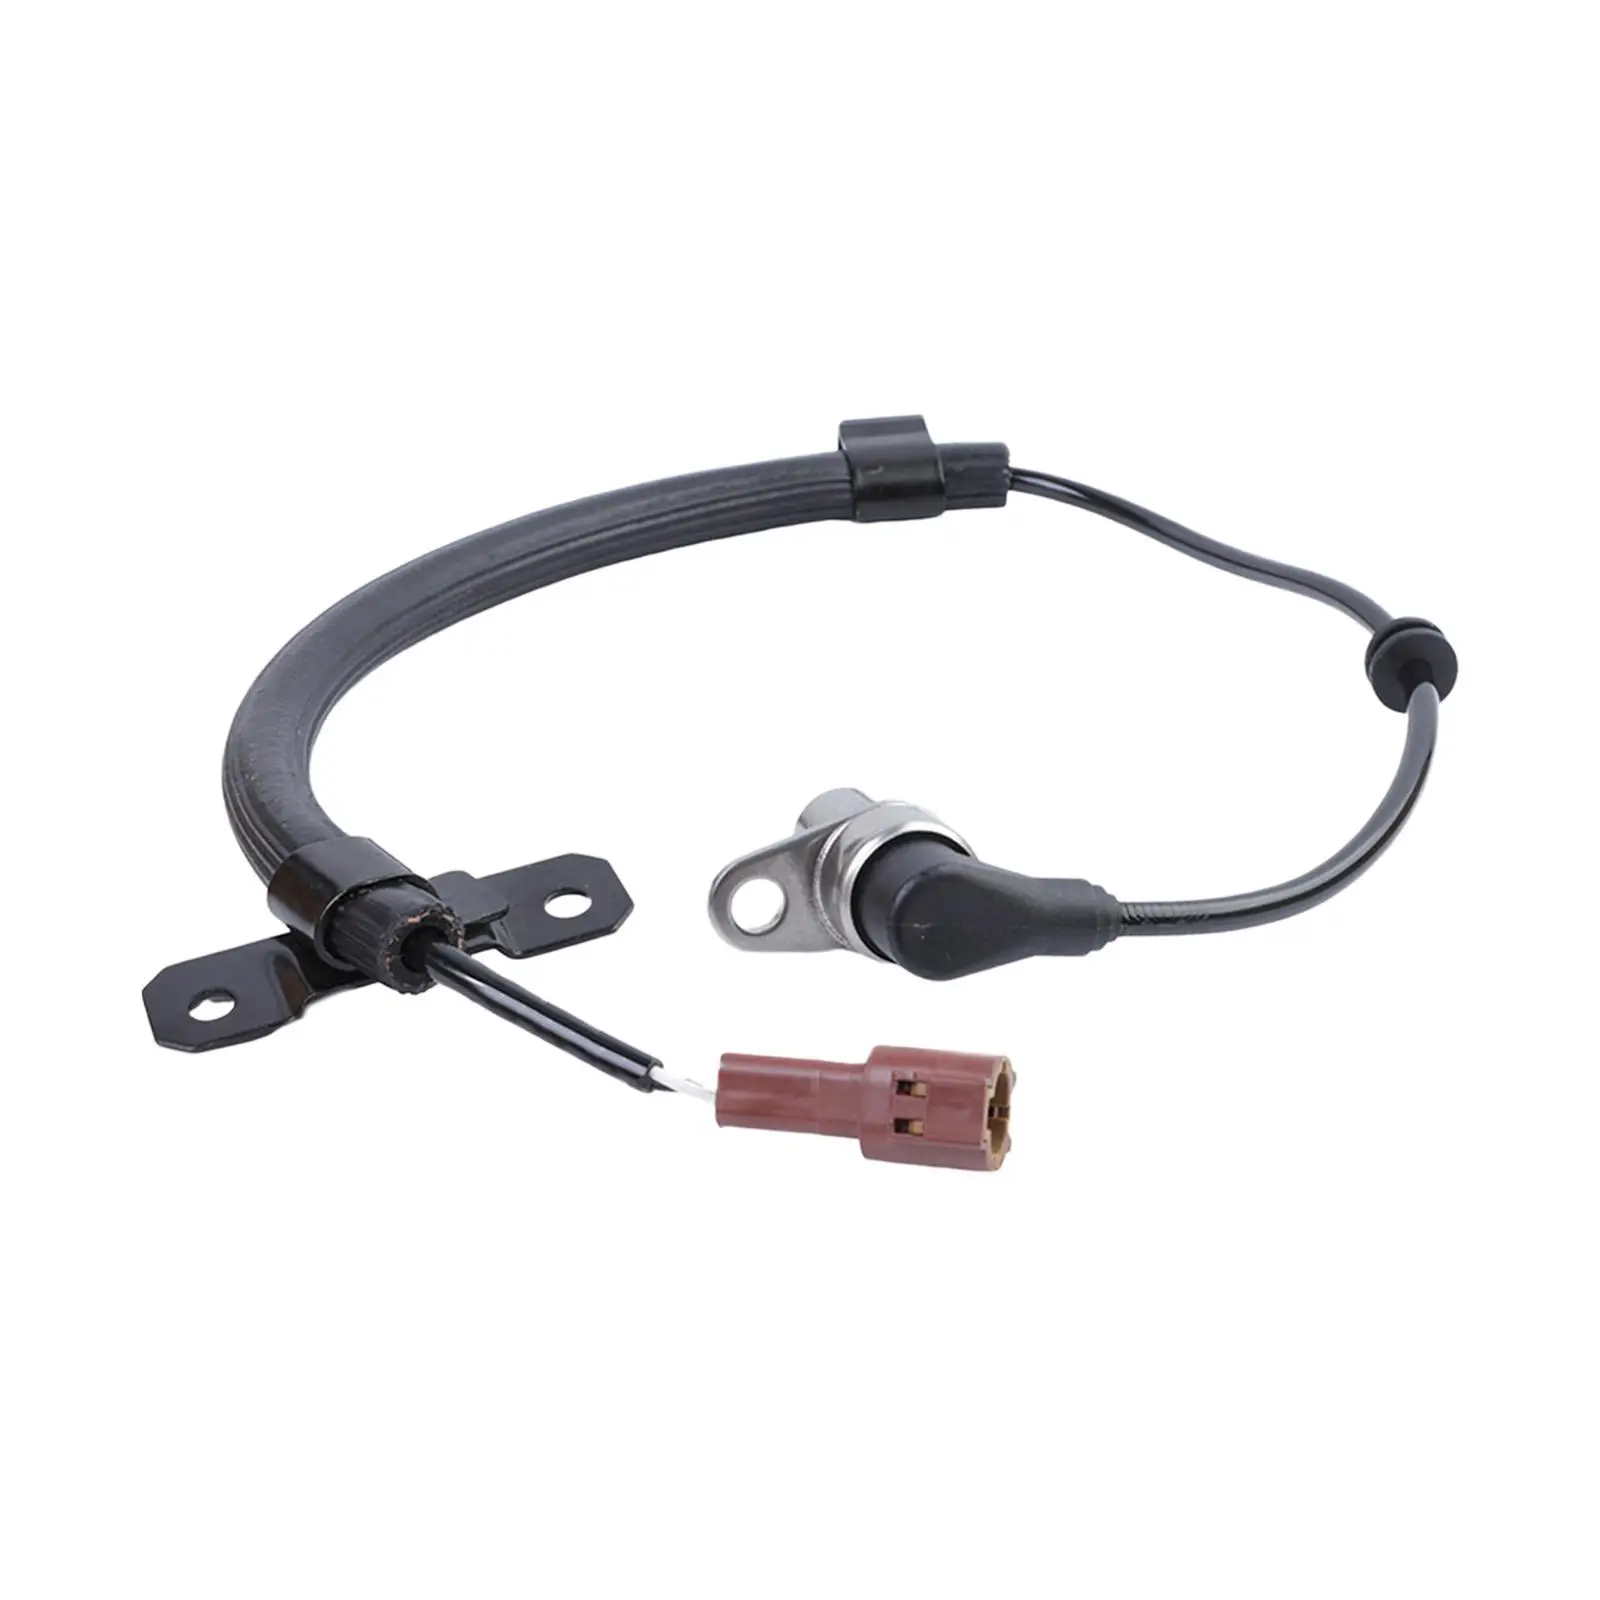 ABS Wheel Speed Sensor 479110-w000 Durable for Nissan Pathfinder 1996-00 Easily Install Professional Vehicle Spare Parts